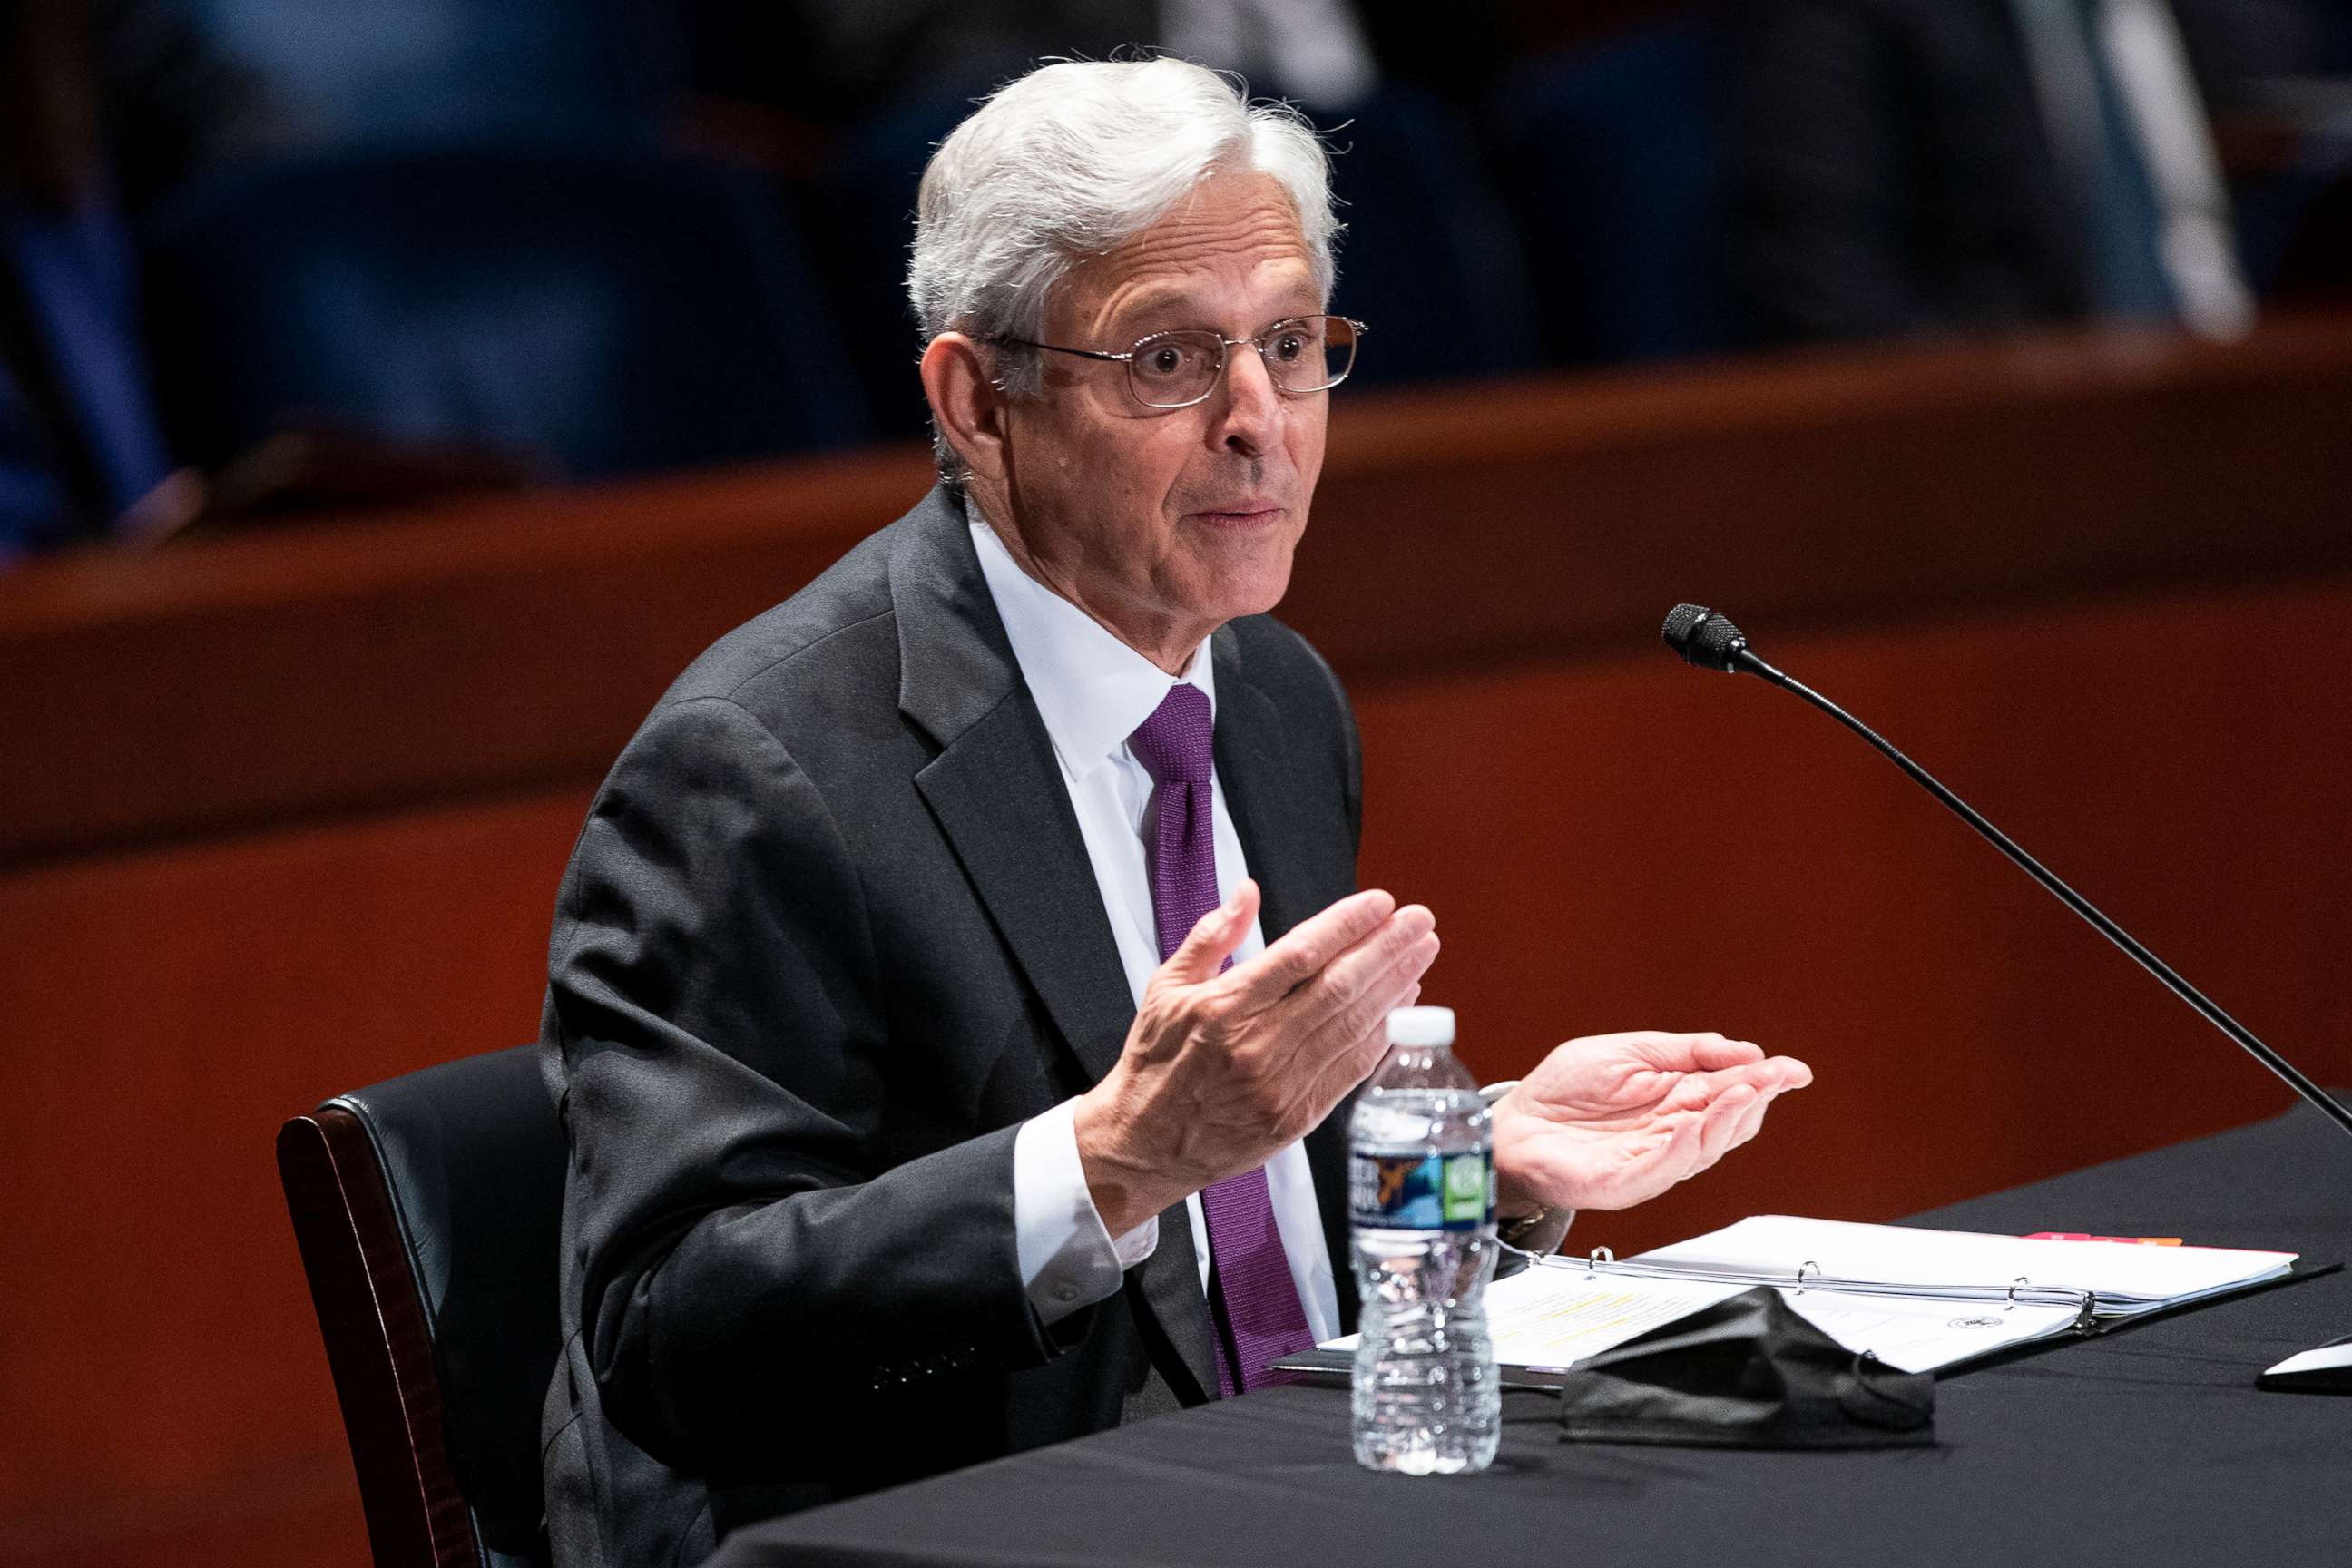 PHOTO: Attorney General Merrick Garland testifies at a House Judiciary Committee hearing at the Capitol, Oct. 21, 2021.